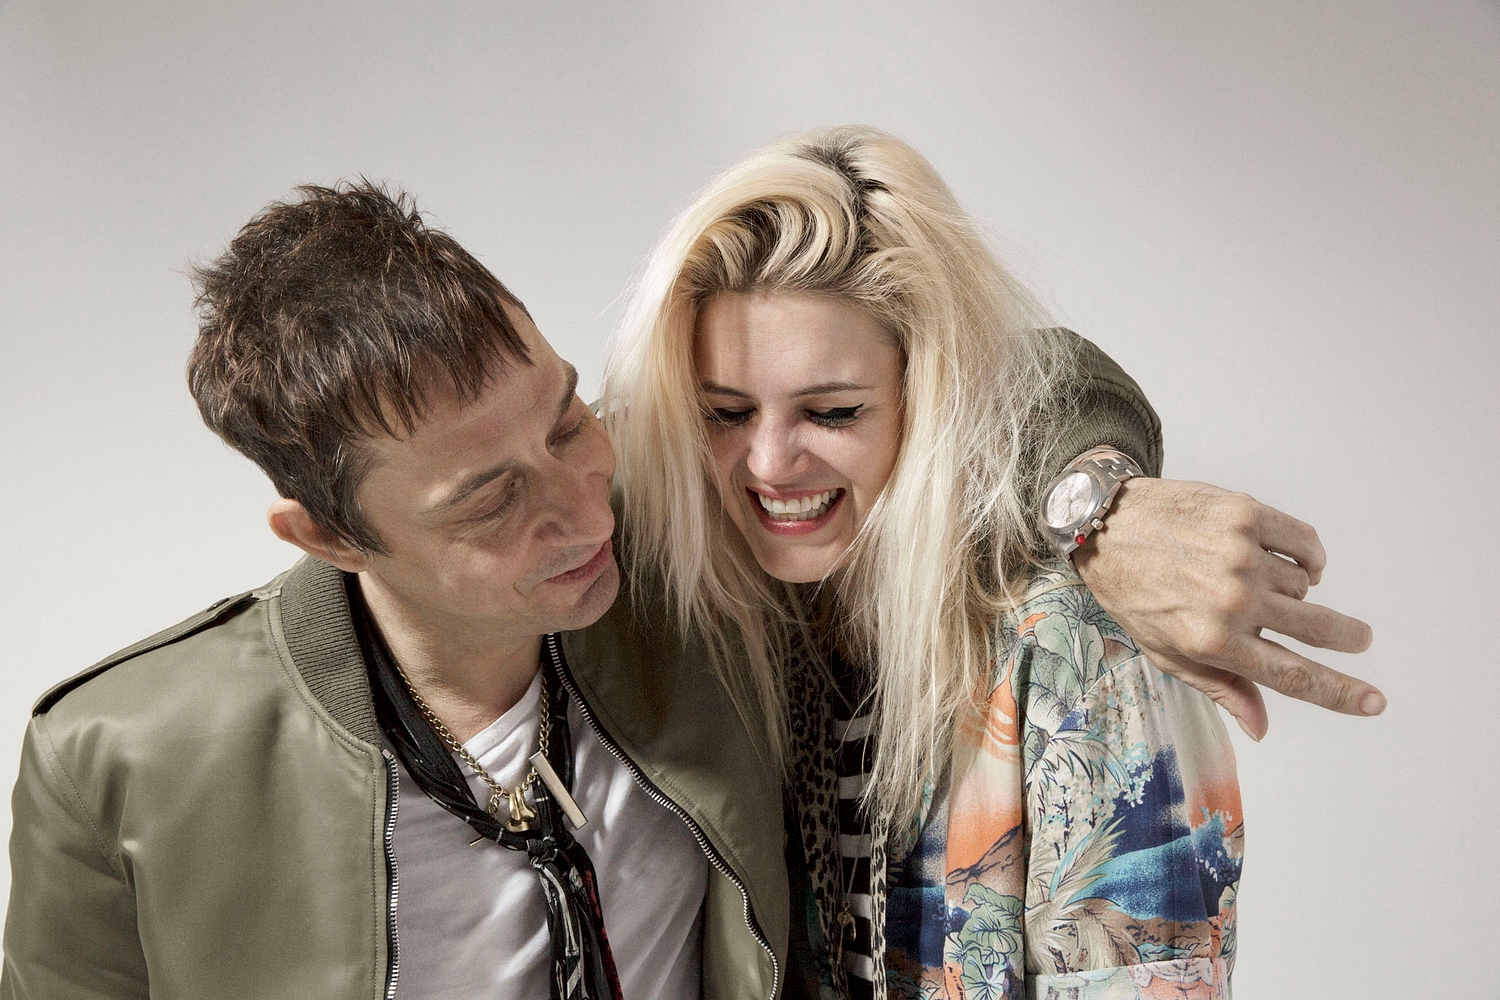 Watch The Kills play two songs on Kimmel